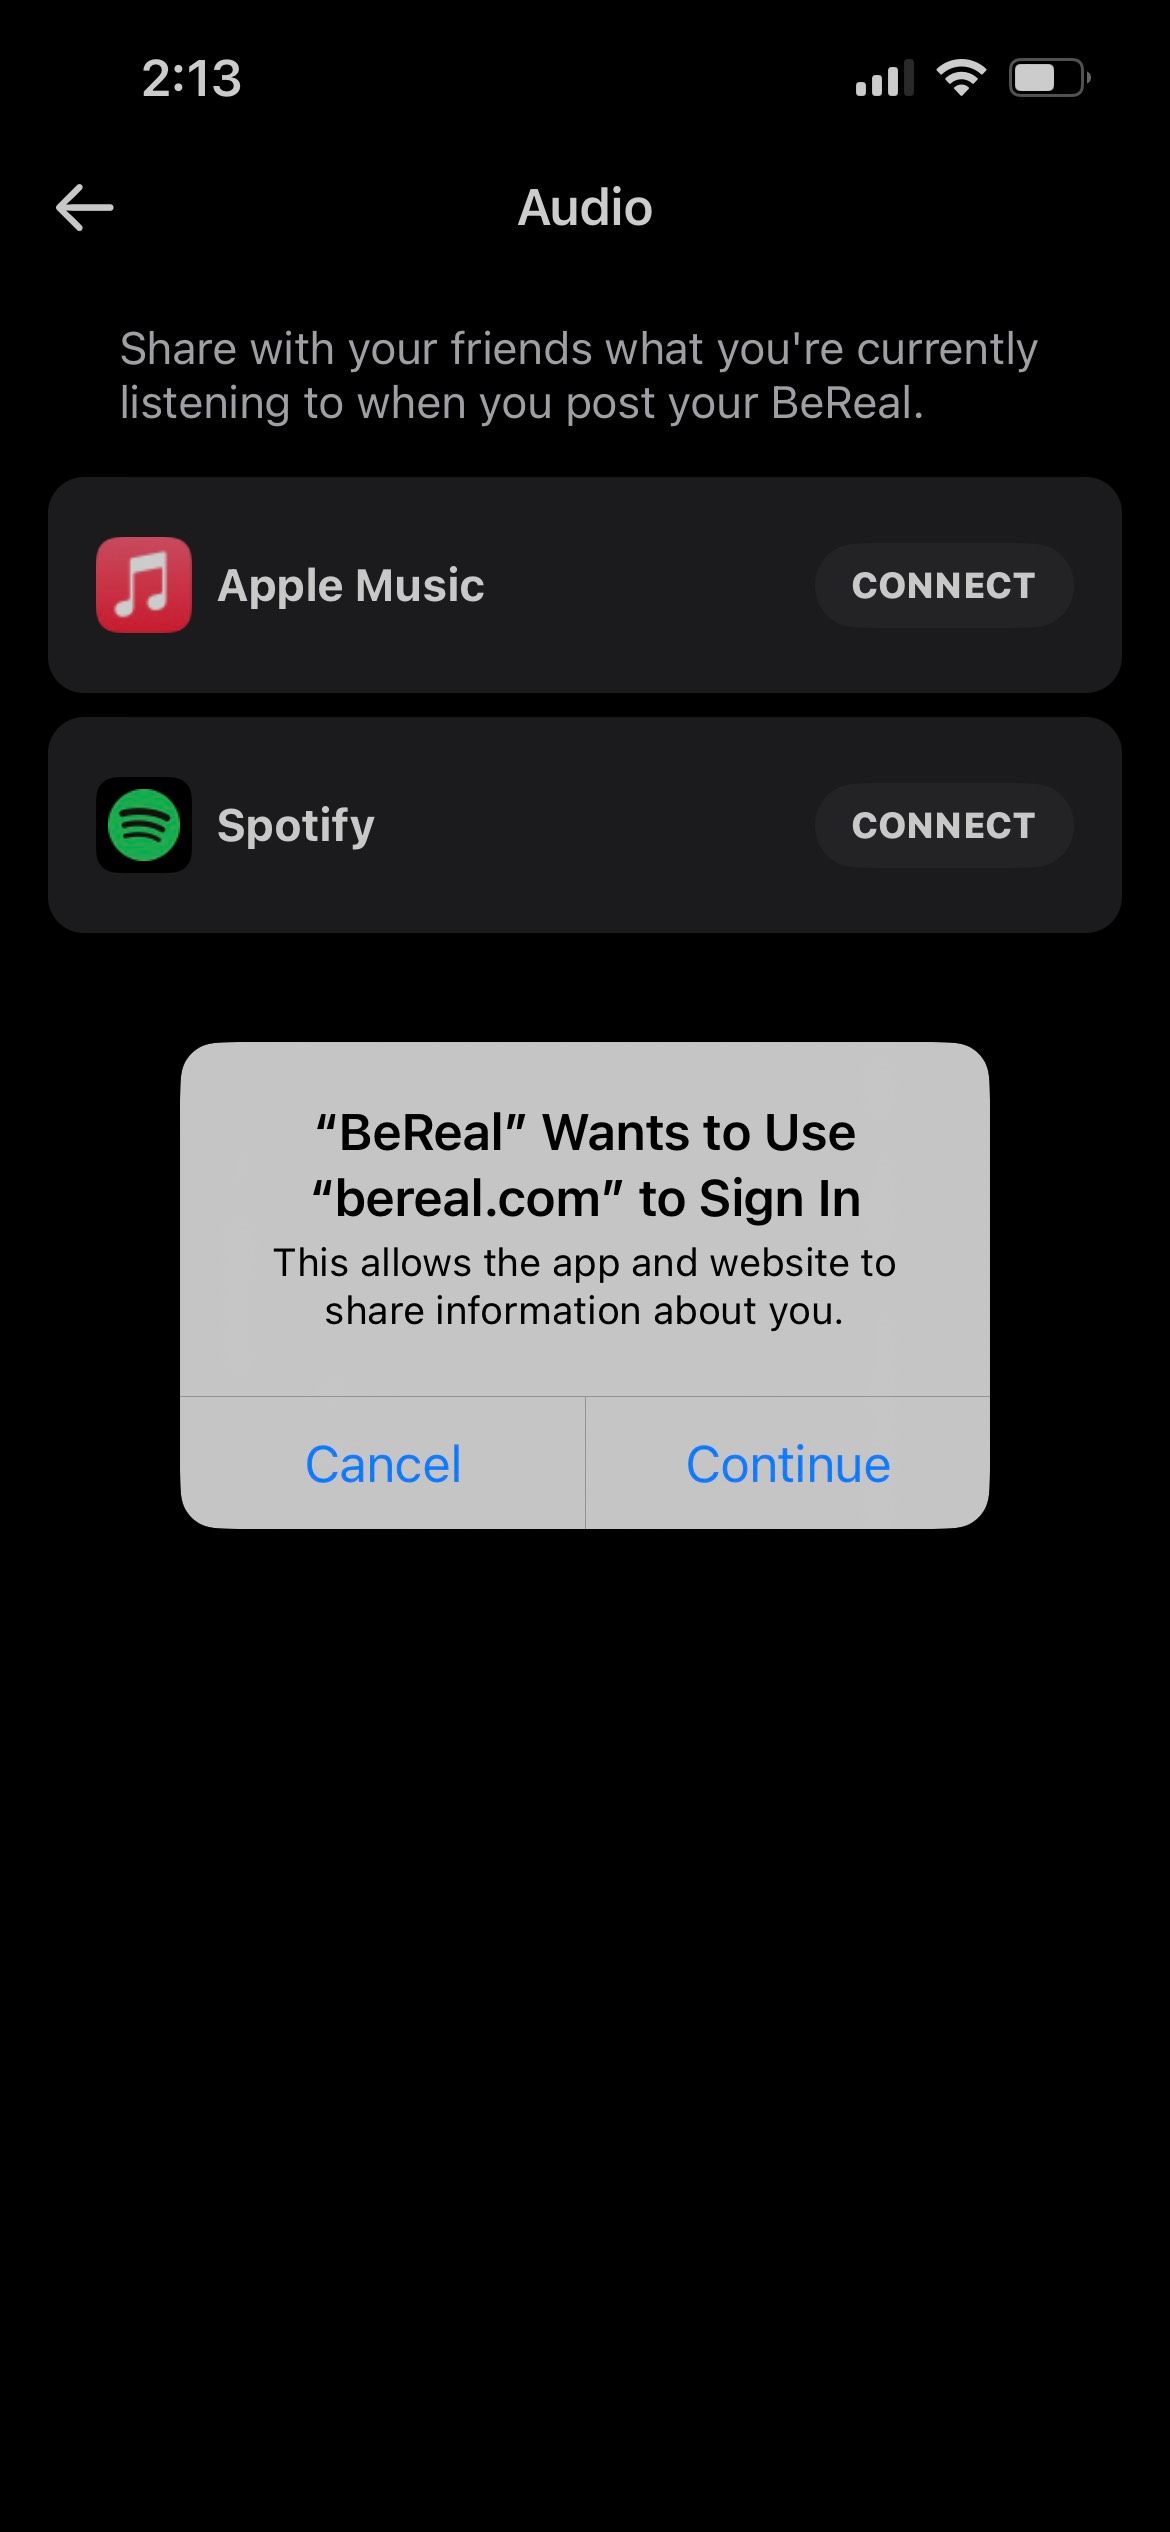 BeReal Audio Connection Pop-up